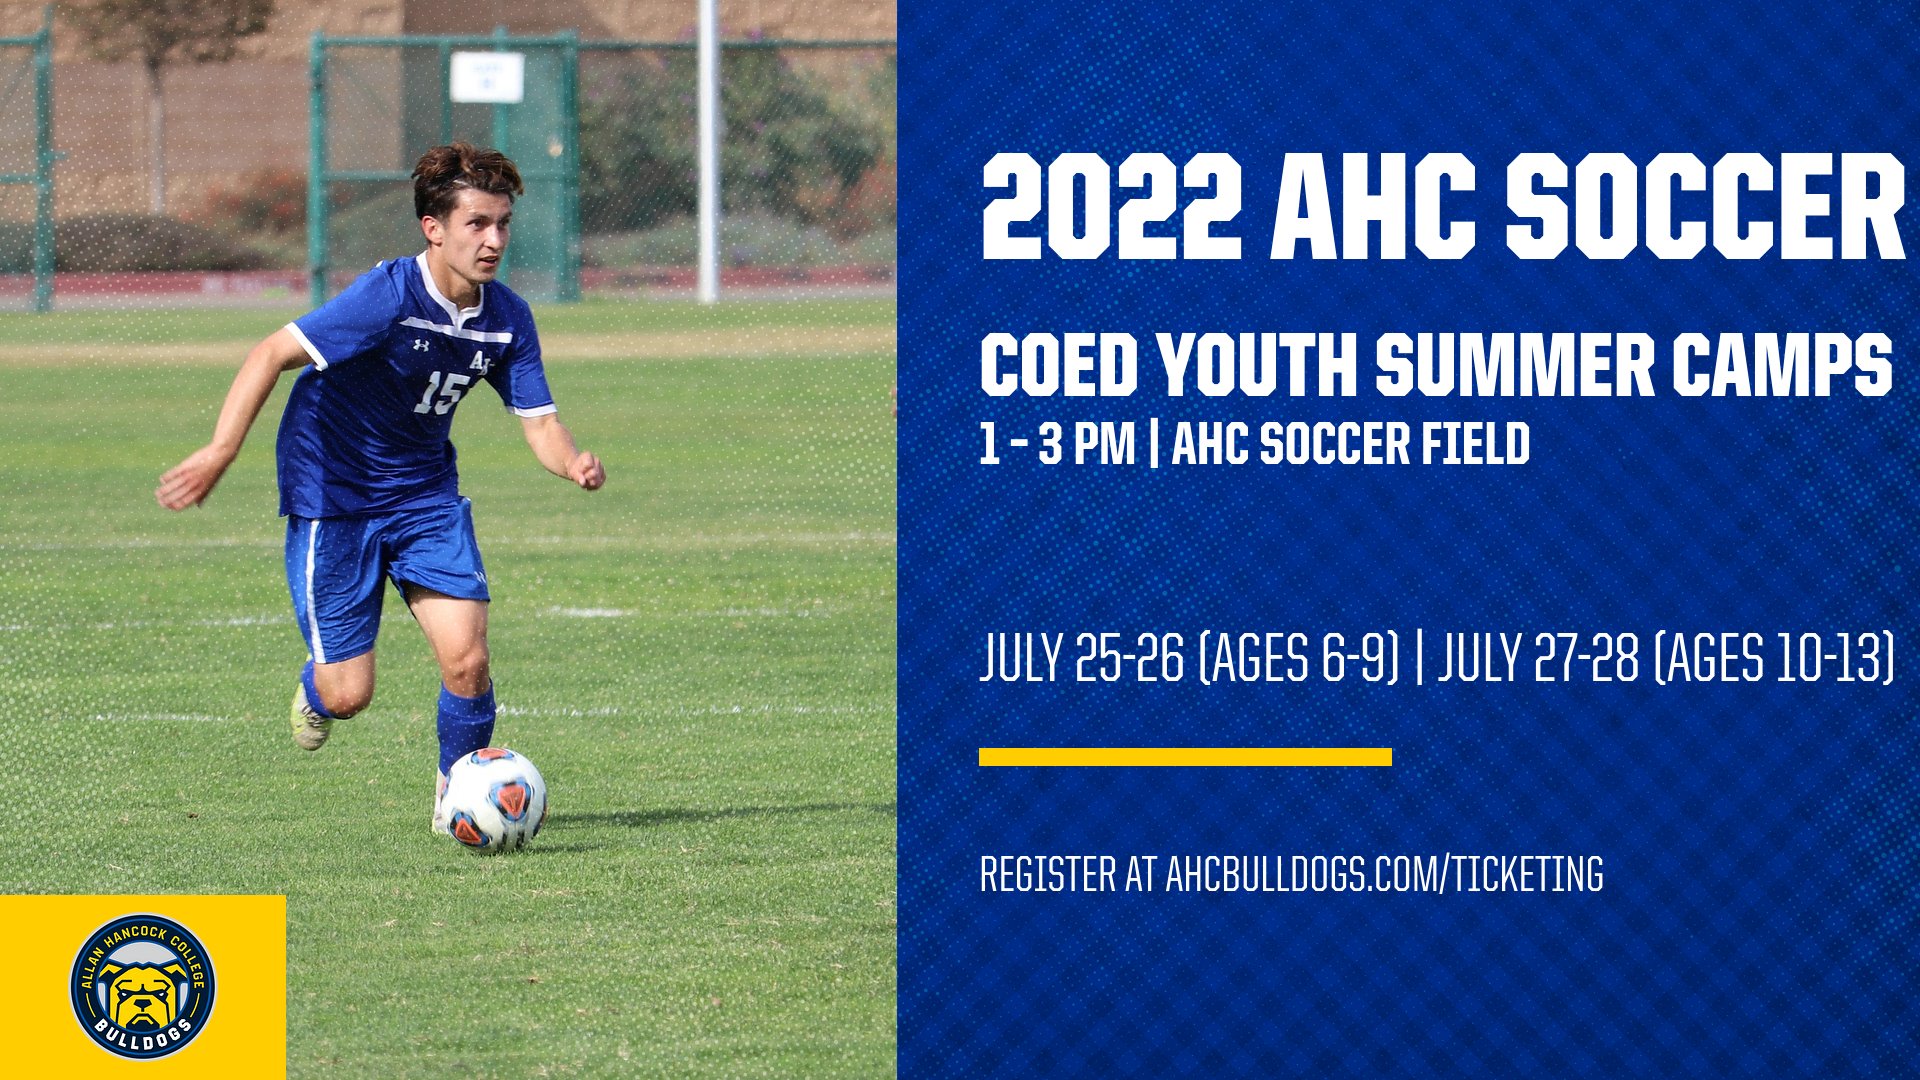 AHC Soccer Announces Youth Summer Camp Dates